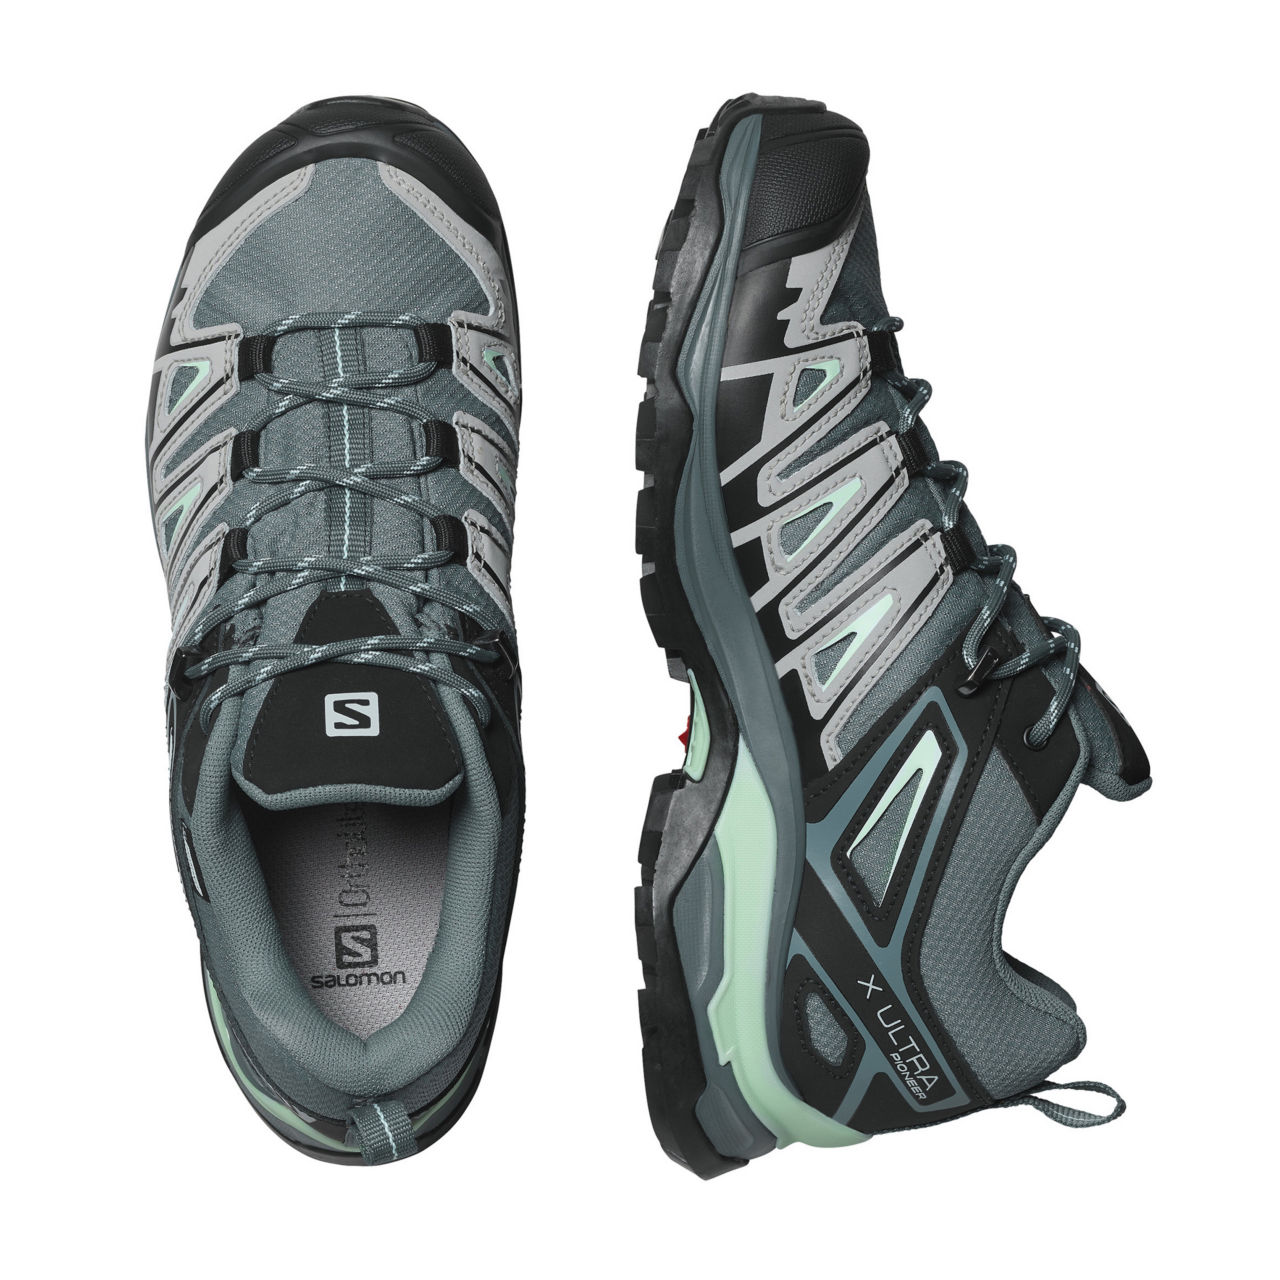 Women’s Salomon® X Ultra Pioneer CSWP Hiking Shoes - STORMY WEATHER image number 3